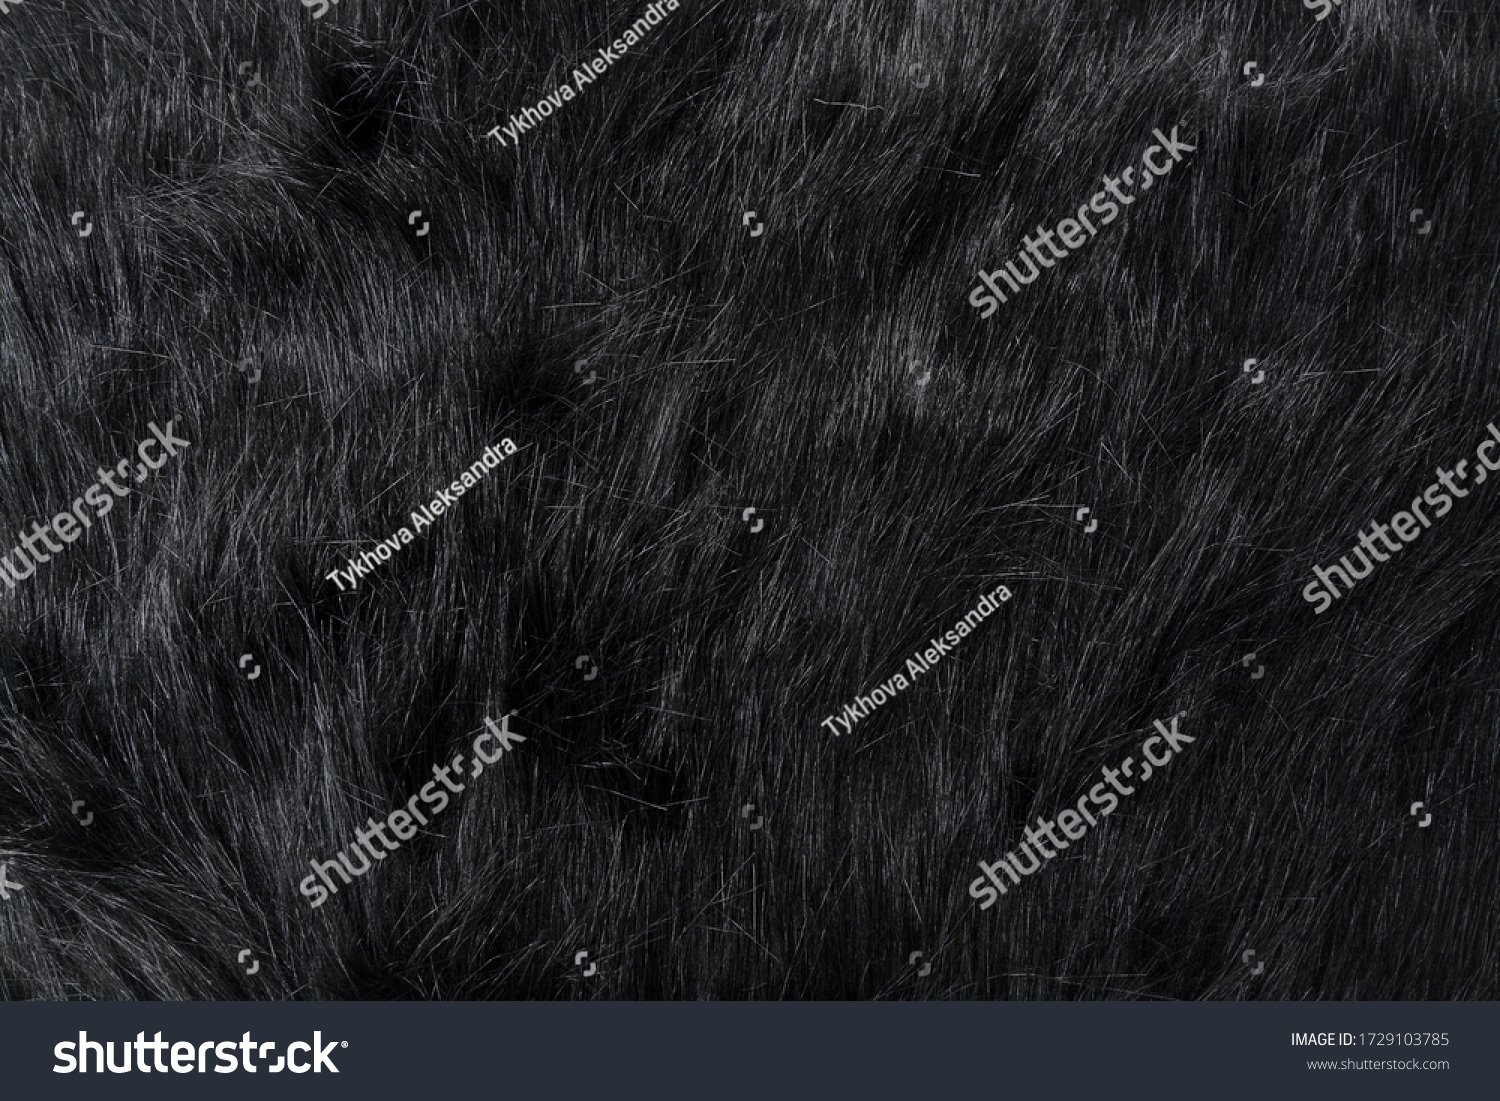 Long black fur of a bear or dog. Faux fur fabric. Artificial fur fabric texture, useful as background #1729103785